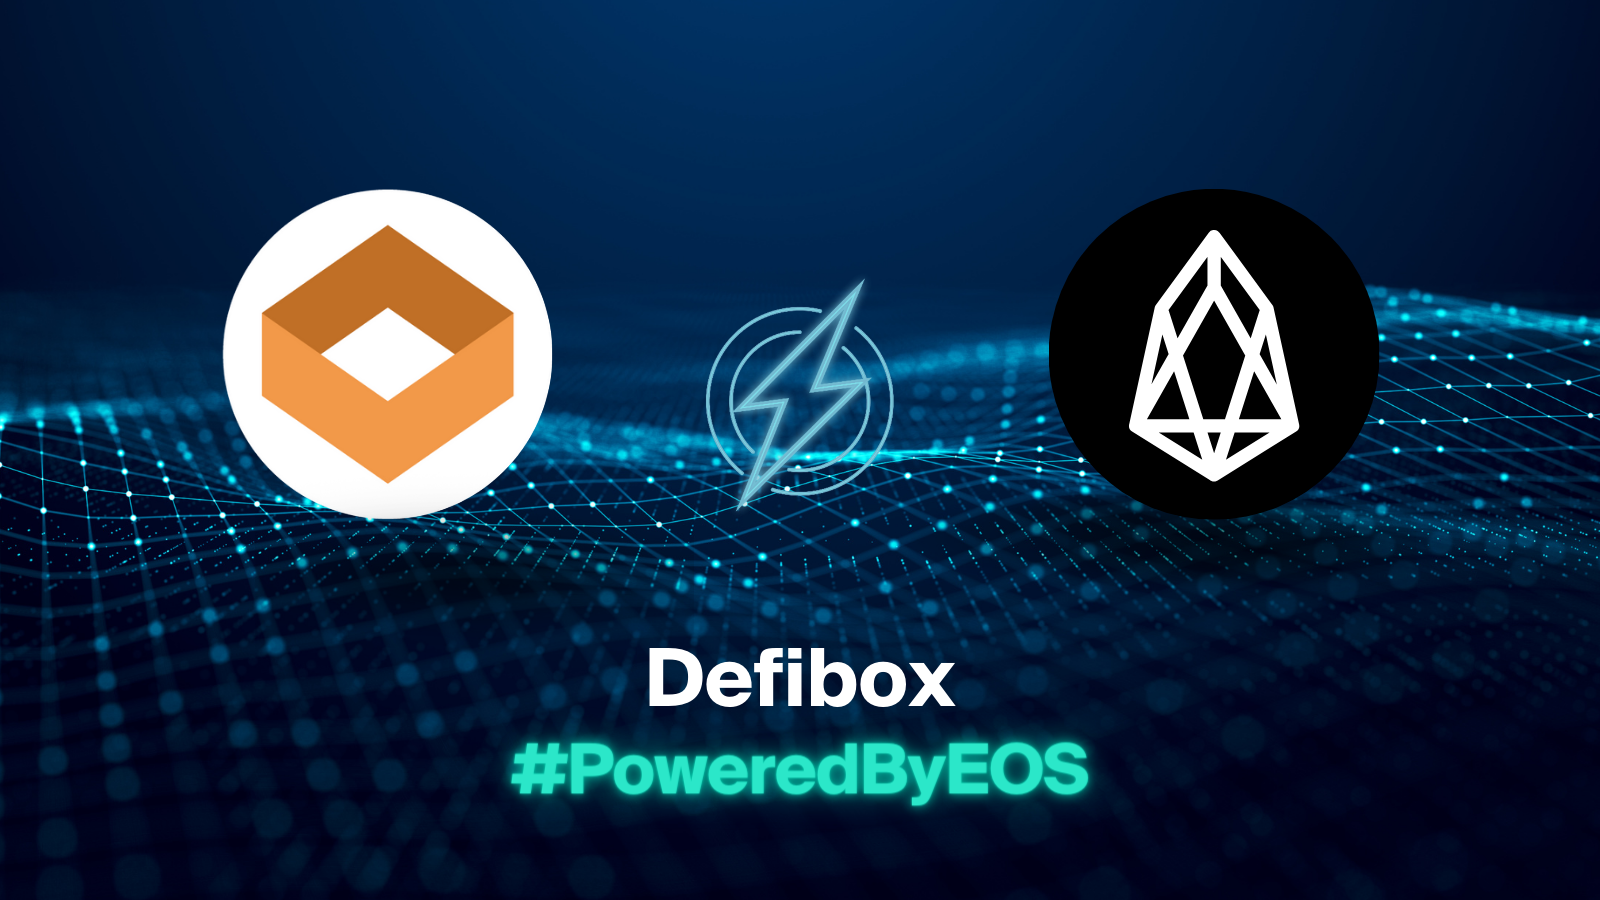 Defibox-Powered-by-EOS.png